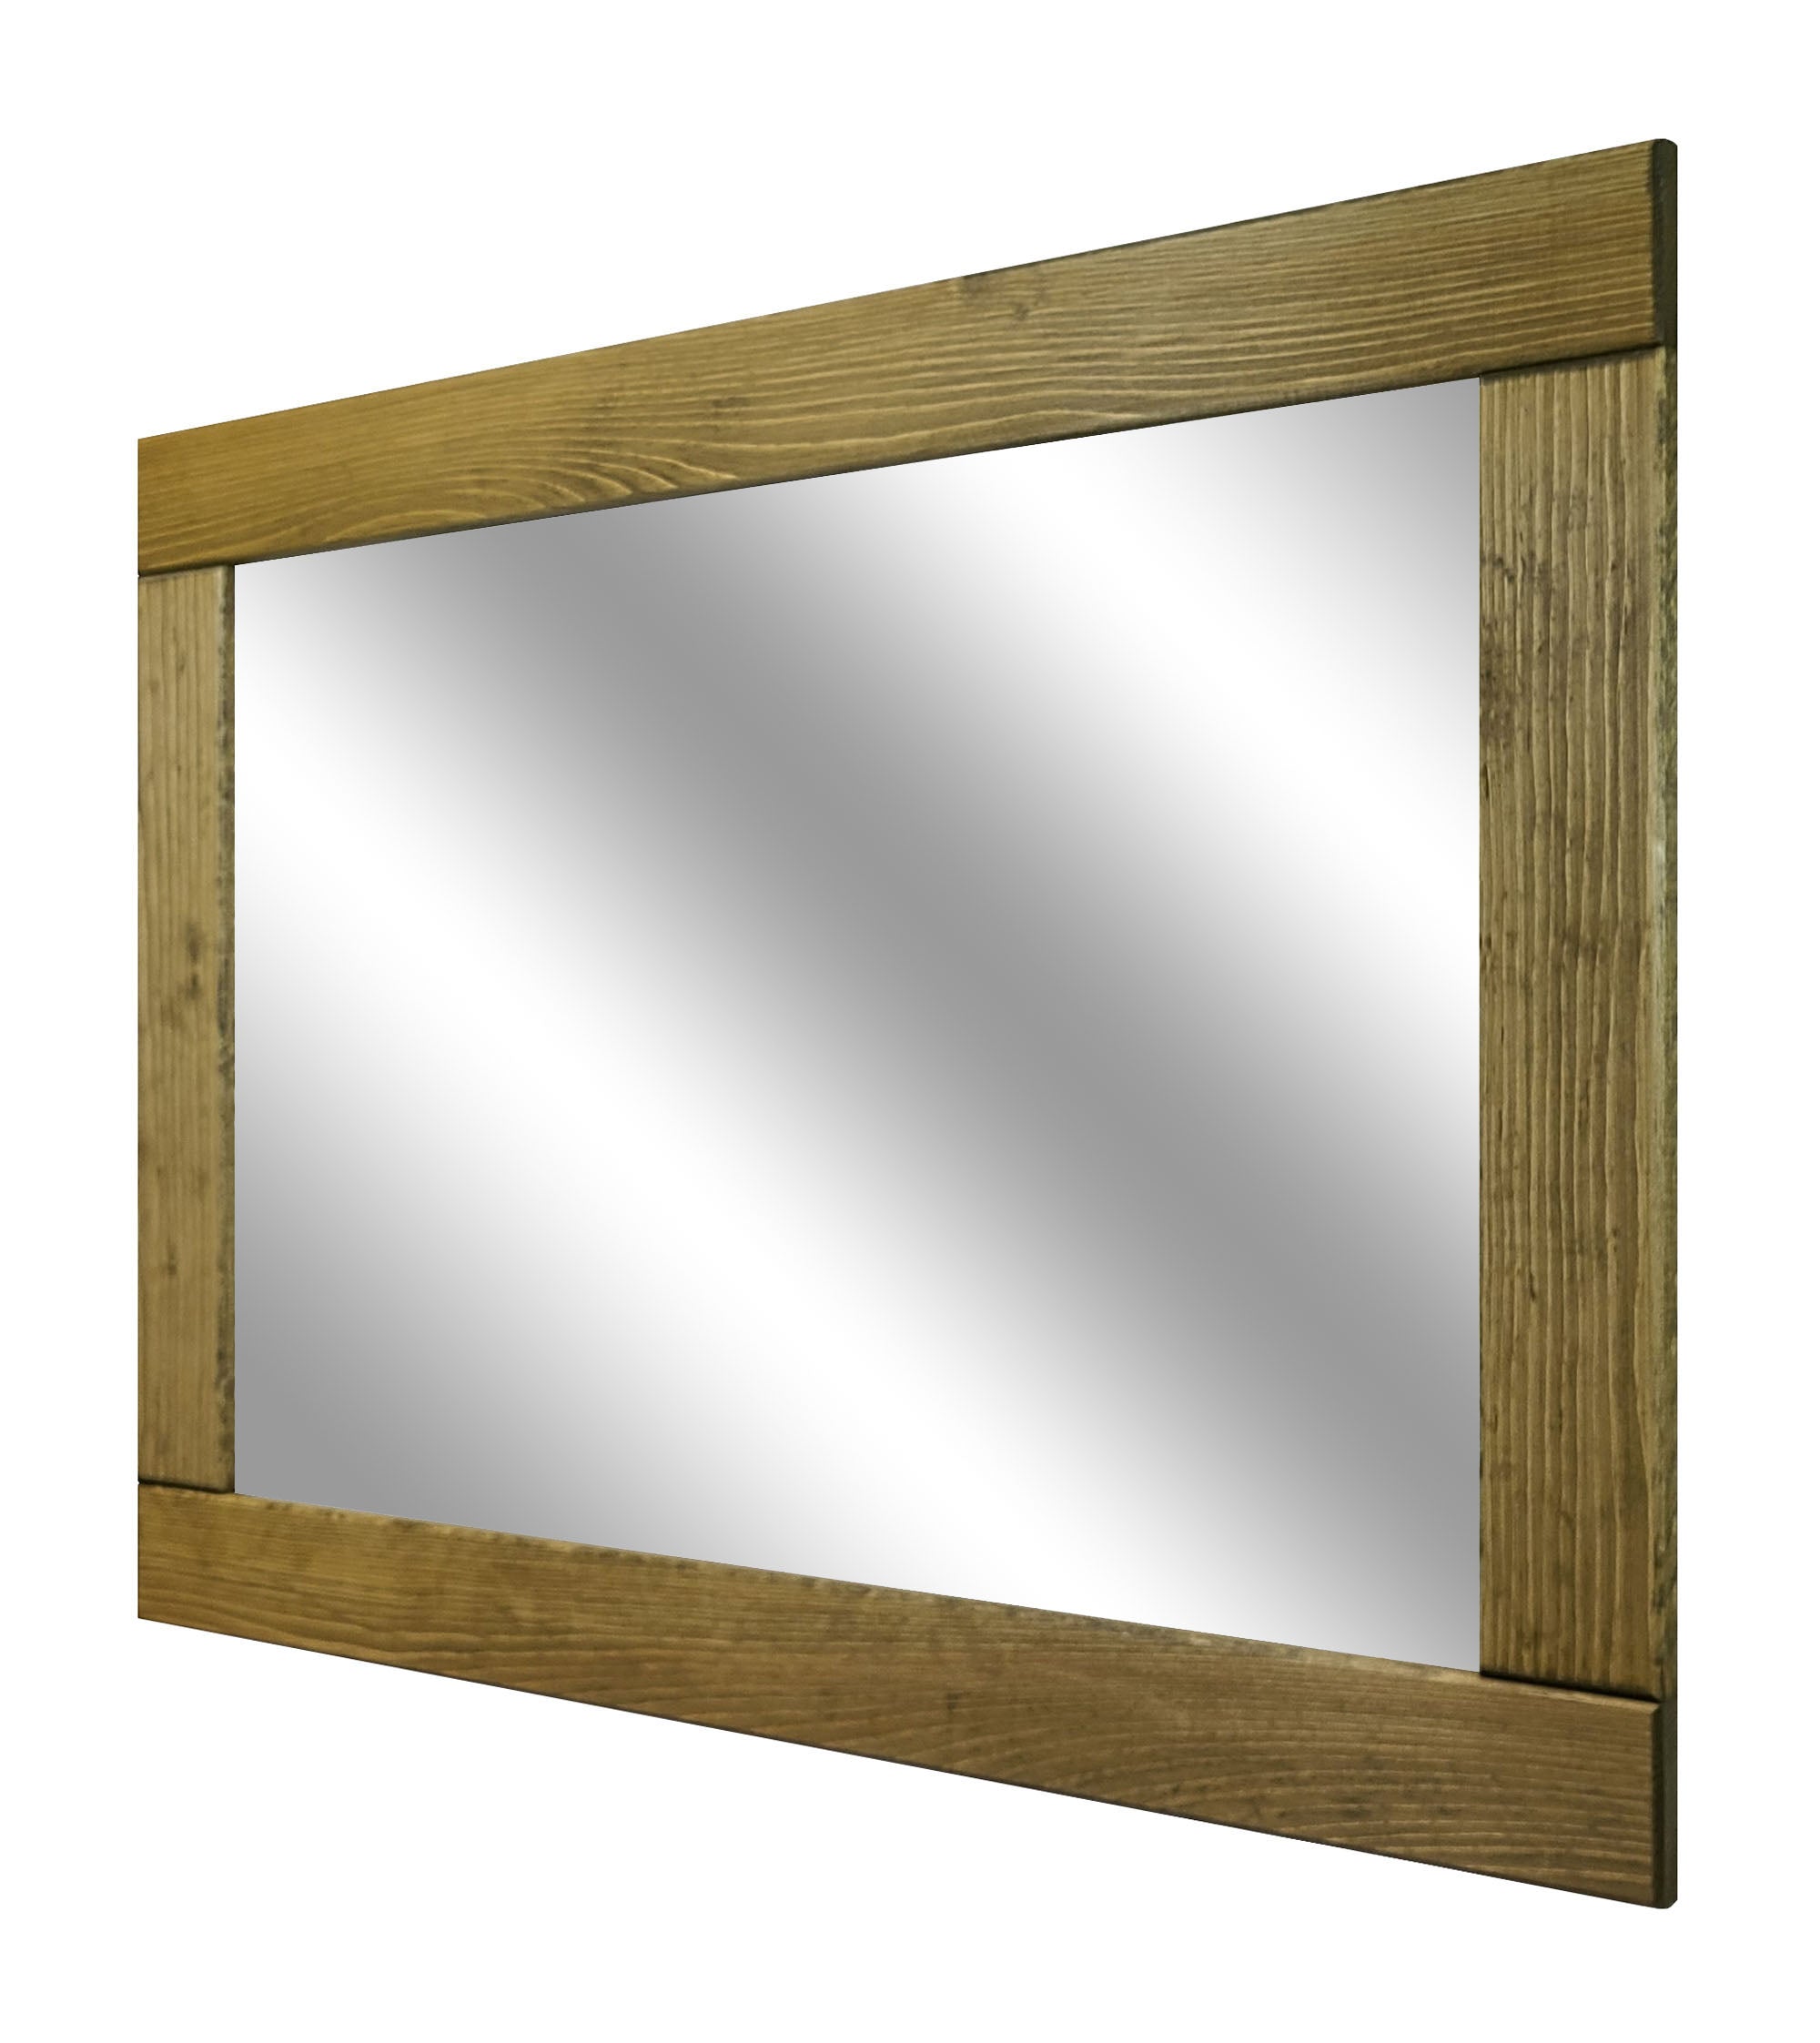 Natural Rustic Wood Framed Mirror, 20 Stain Colors - Shown In Driftwood